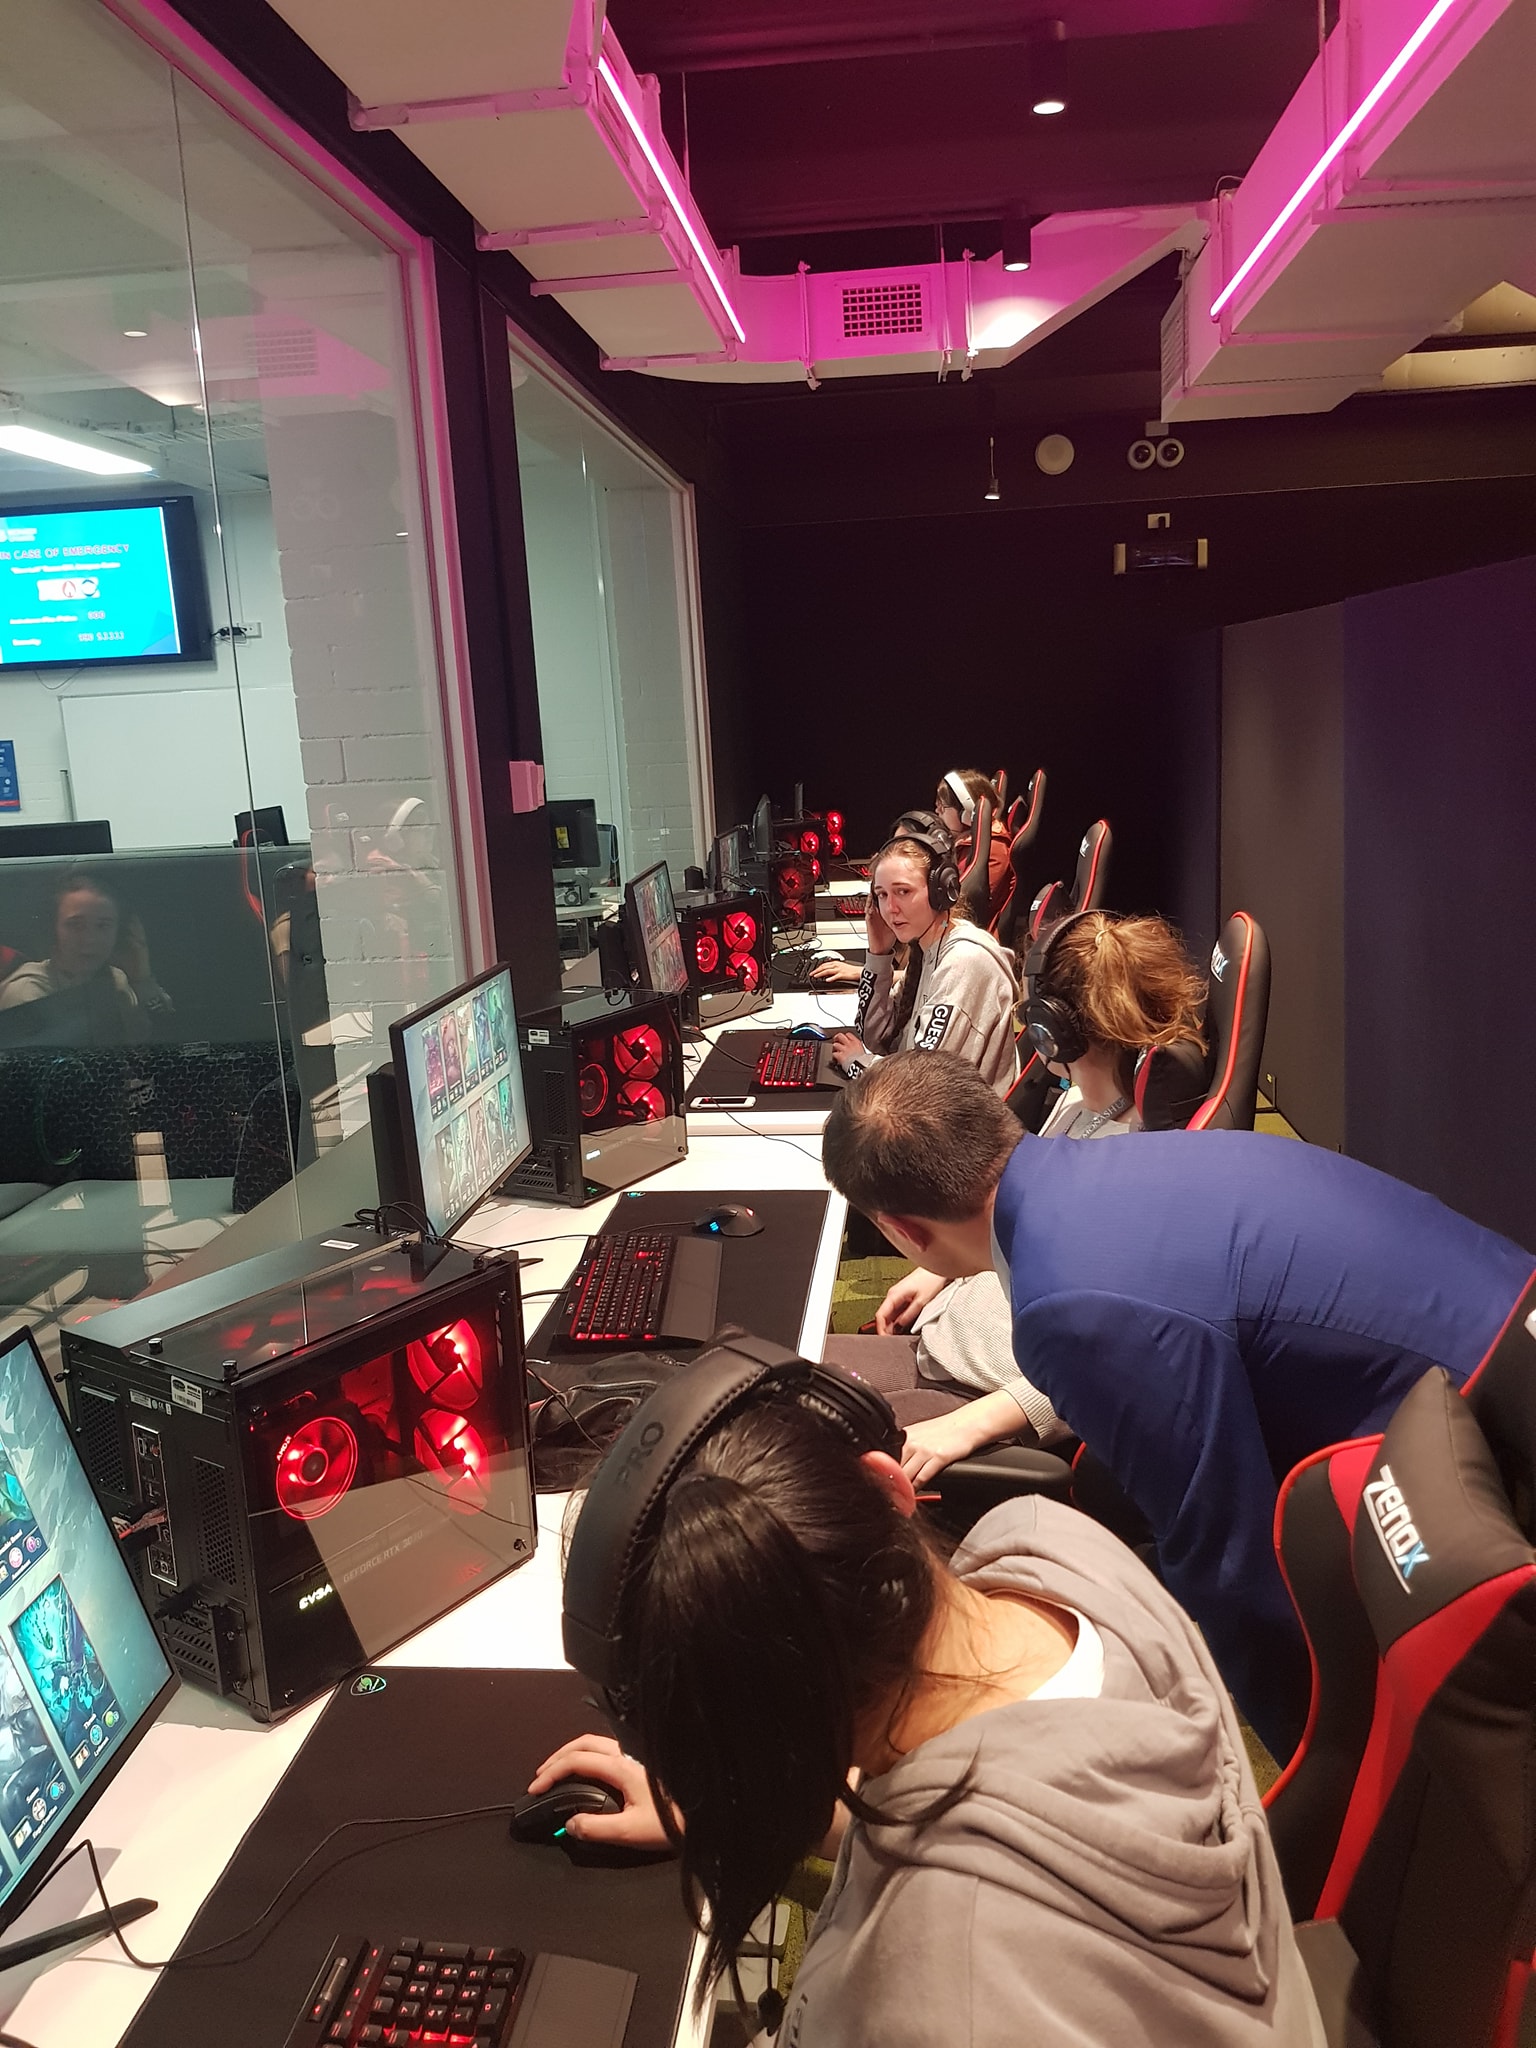 The eSports room open for public use